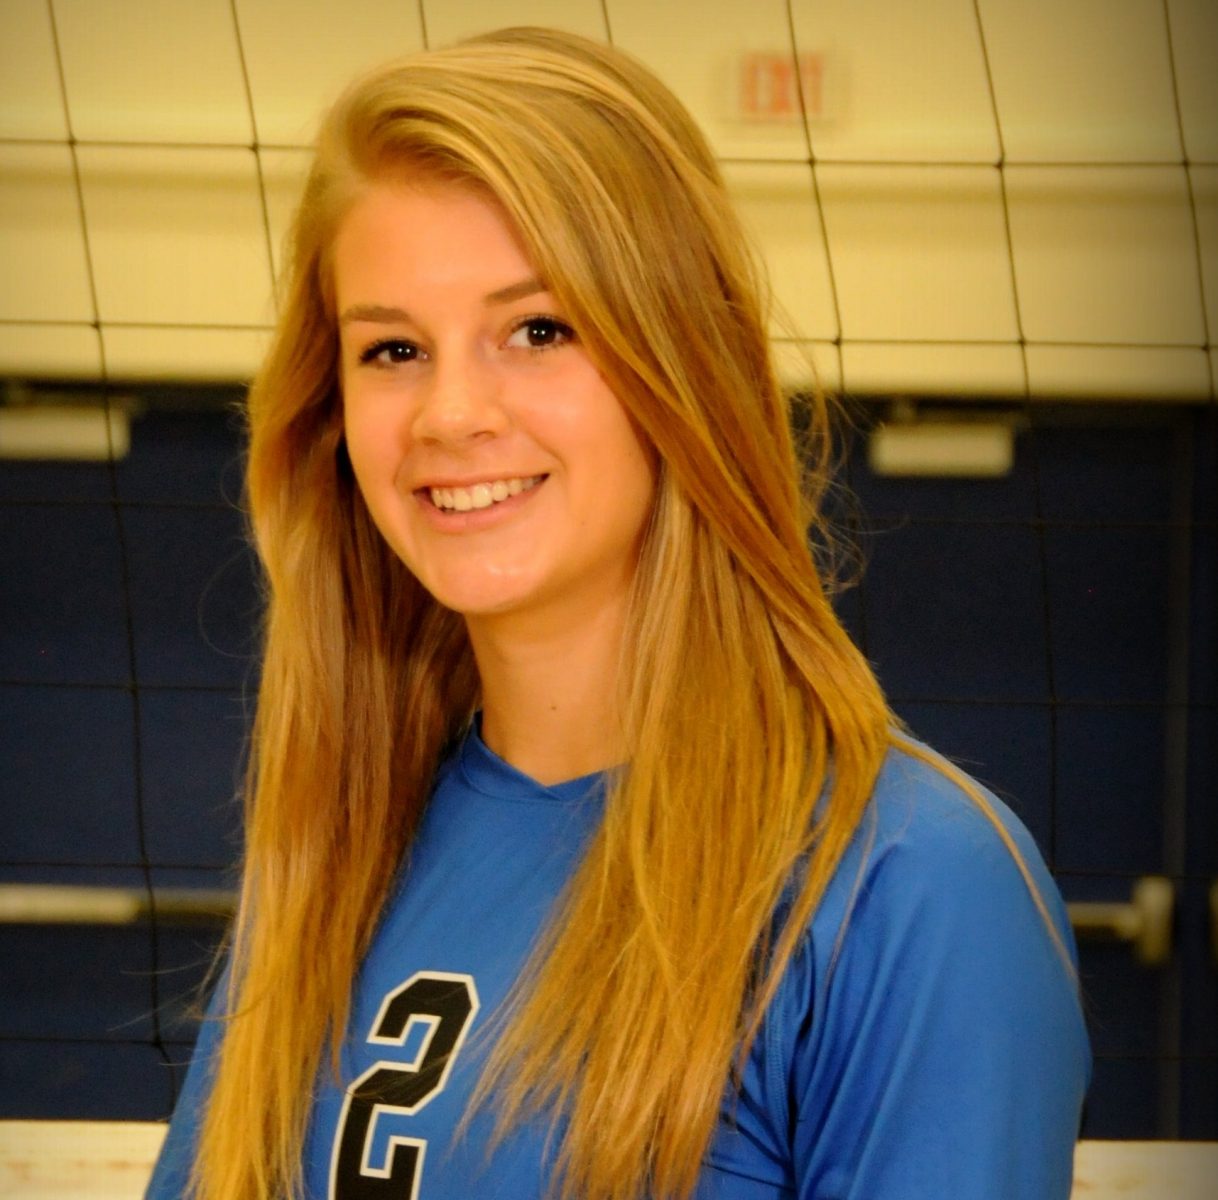 Wardall named Athlete of the Week